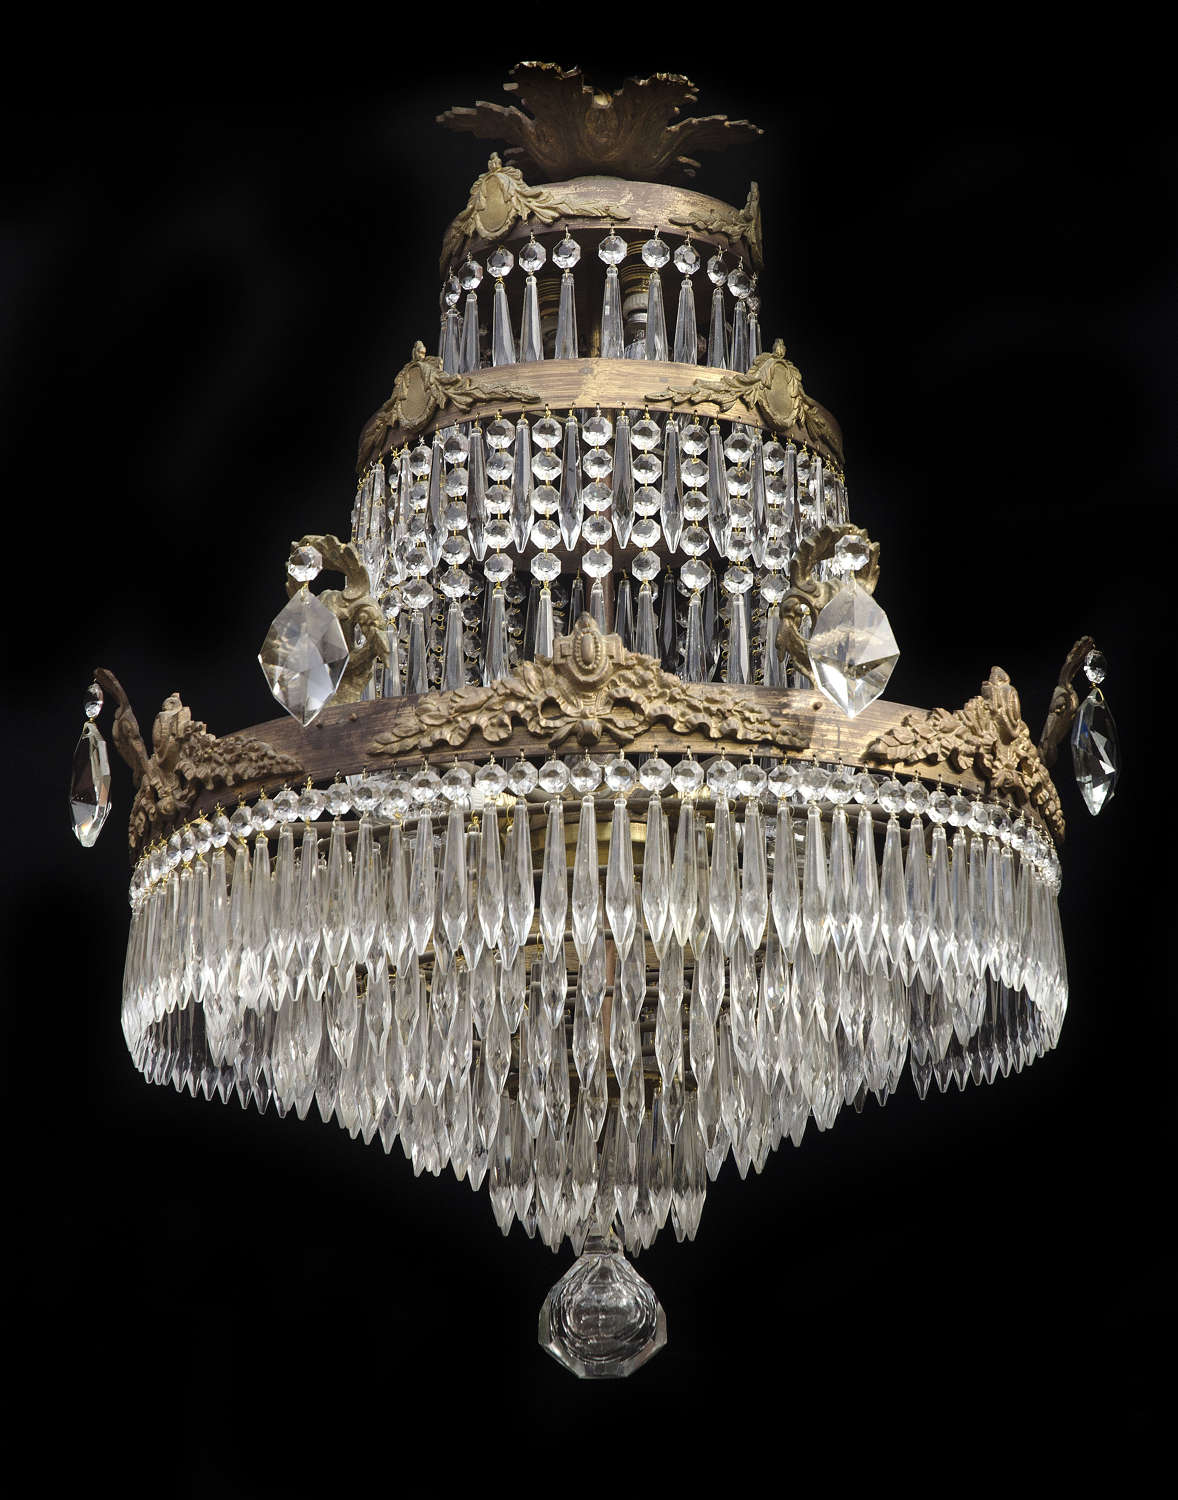 8 Light 3 Tiered Italian Antique Chandelier with icicle drops